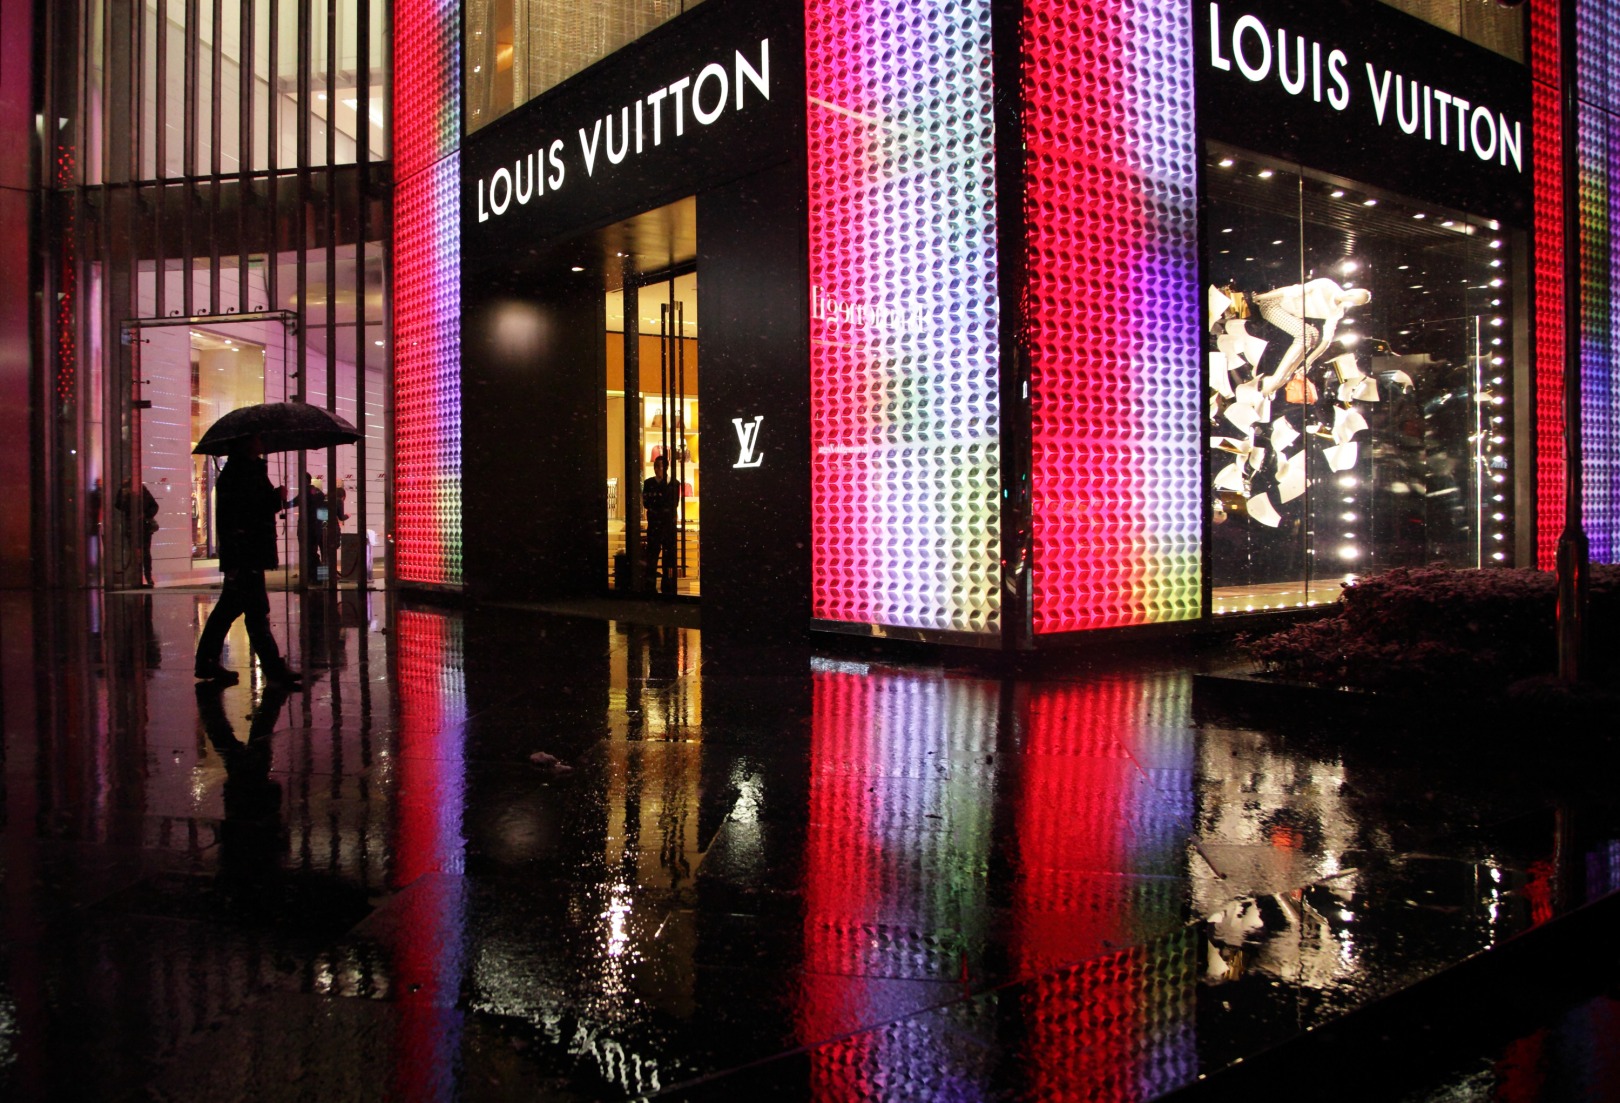 Louis Vuitton to close a major HK store as protests hit sales - CGTN